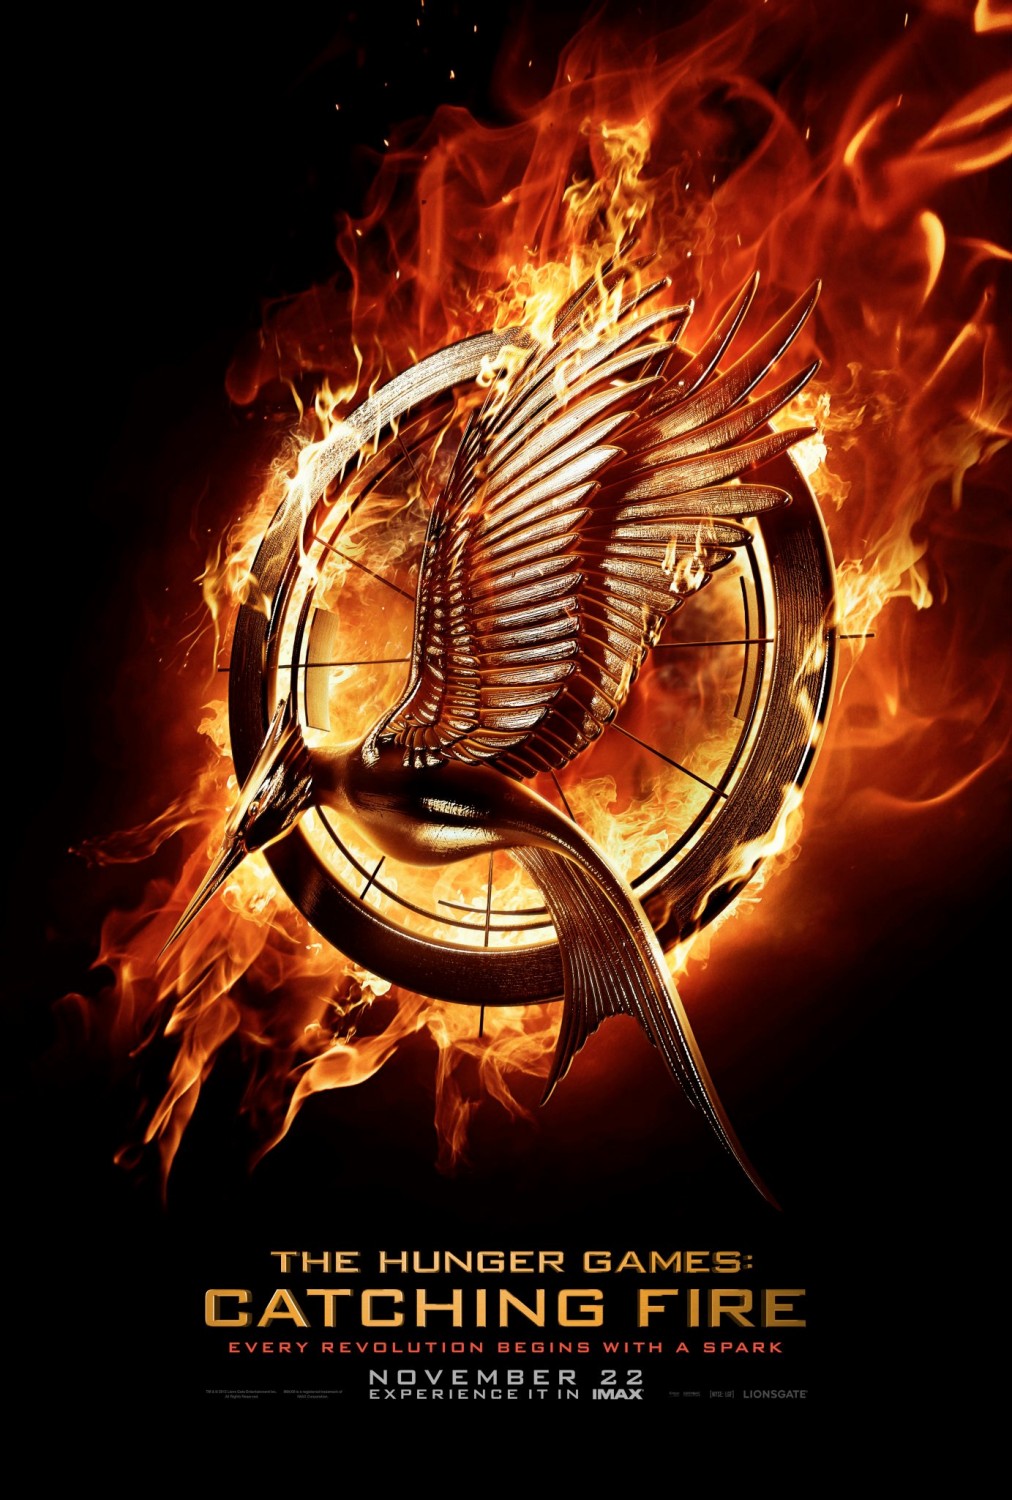 The Hunger Games: Catching Fire gets a trailer – The Second Take